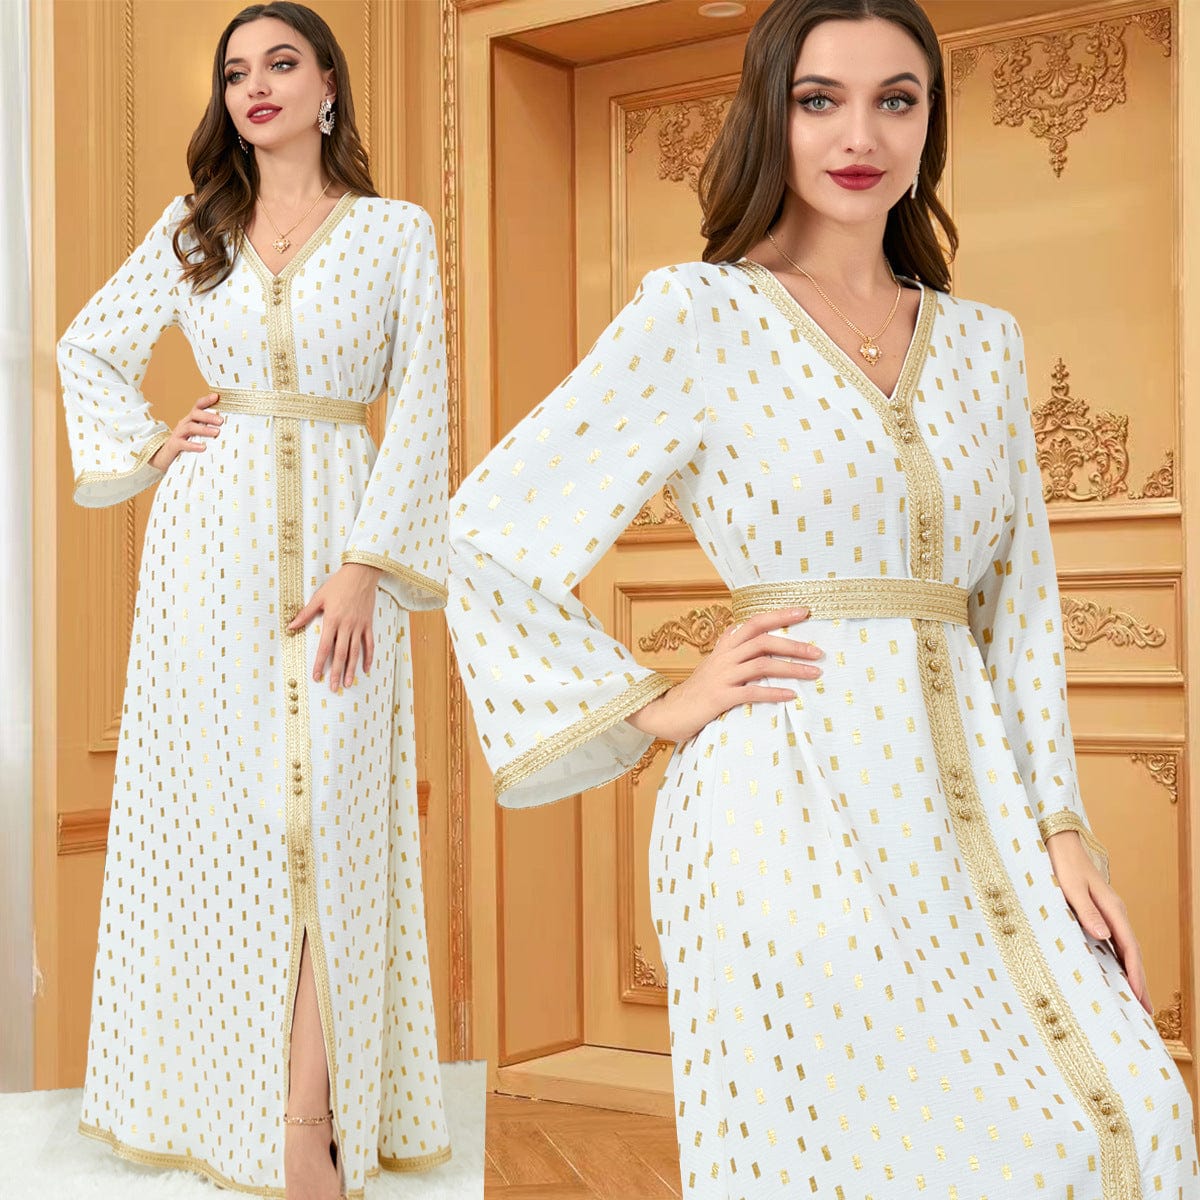 double view of a woman wearing White long sleeve gold dress